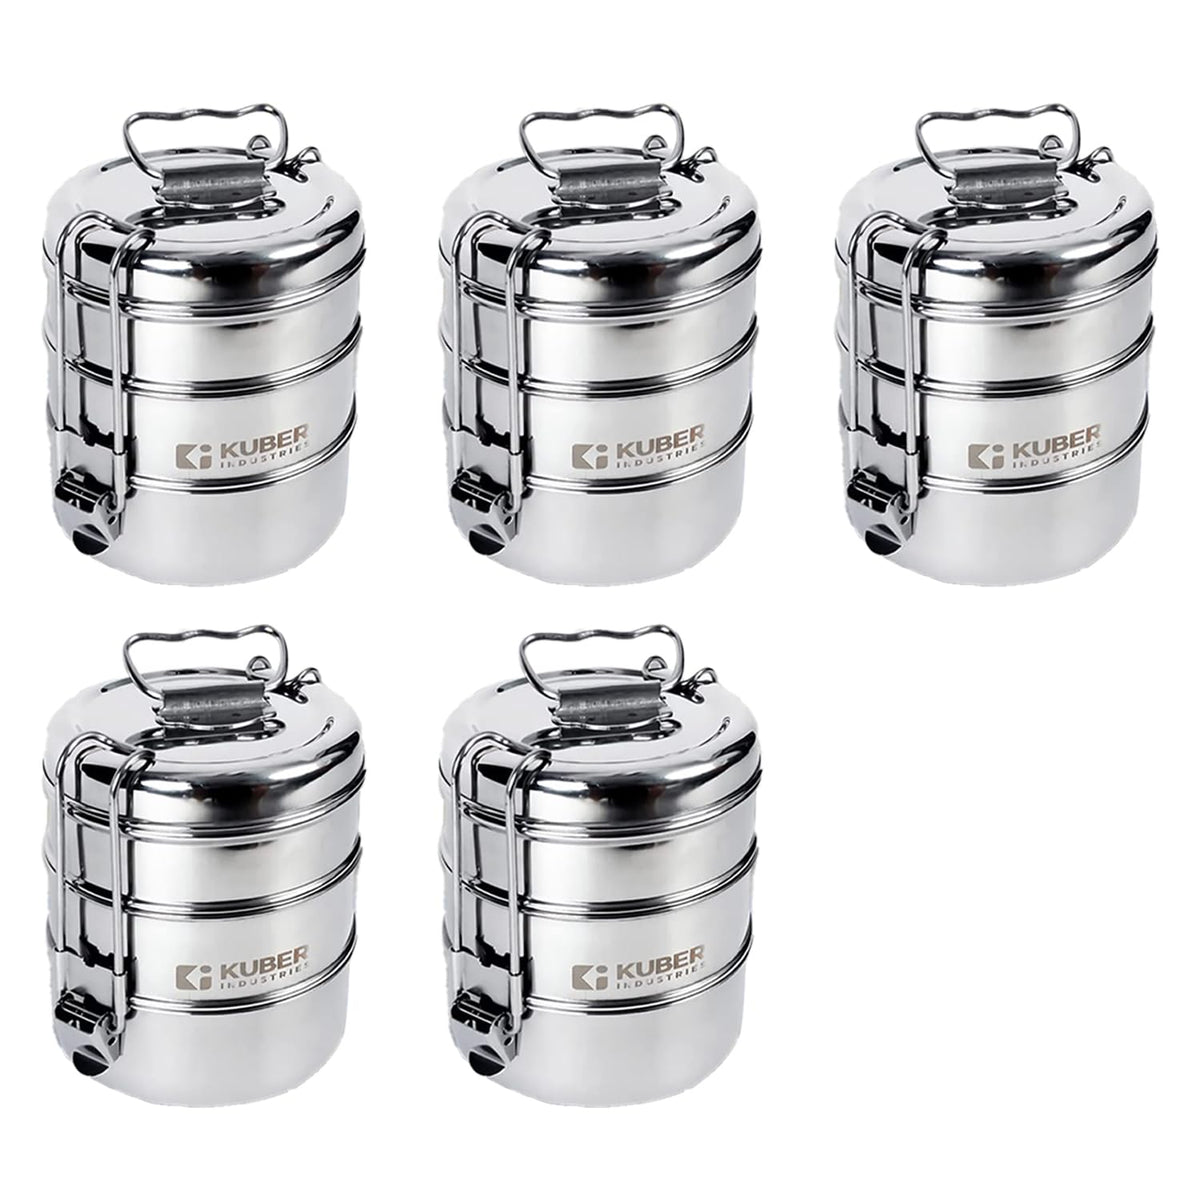 Kuber Industries Clipper Stainless Steel Tiffin Box | Lunch Box with Locking Clip I Silver | Set of 3 Box | Everyday use Home Office Steel Lunch Box (3 Container, 1000ml) (Pack of 4)